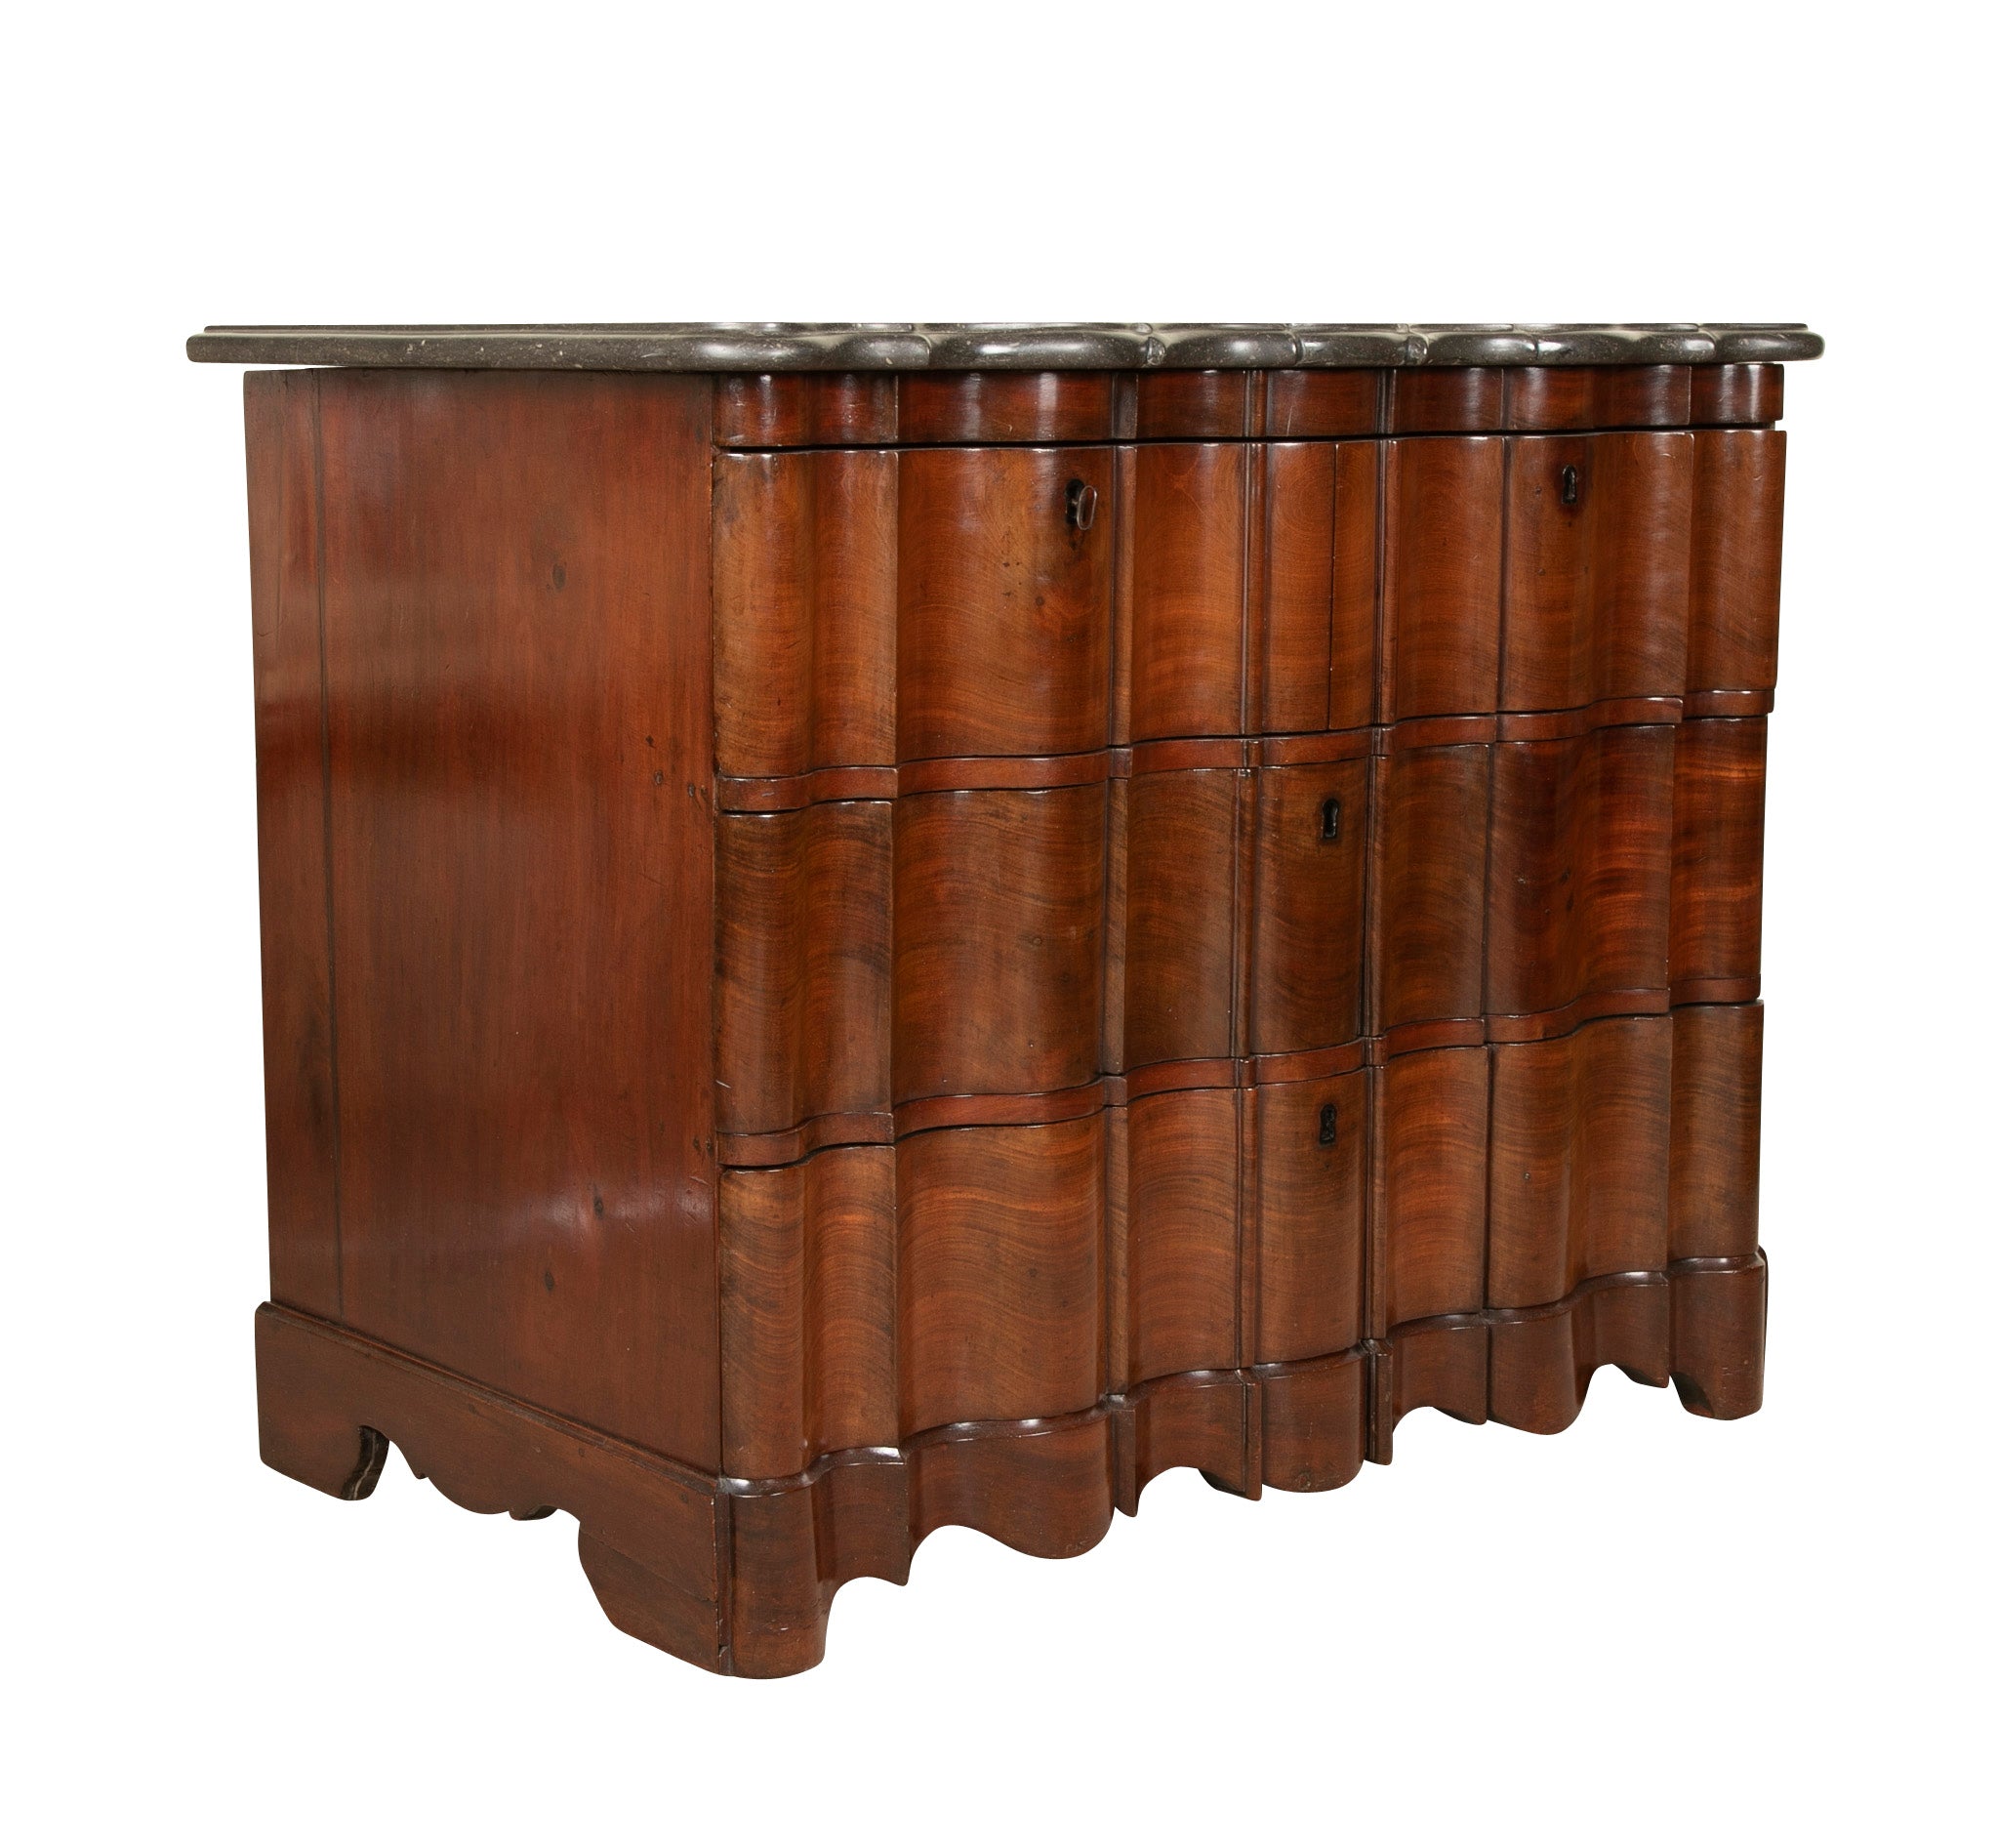 A Handsome Baroque Four Drawer Walnut Chest with Original Shaped Marble Top